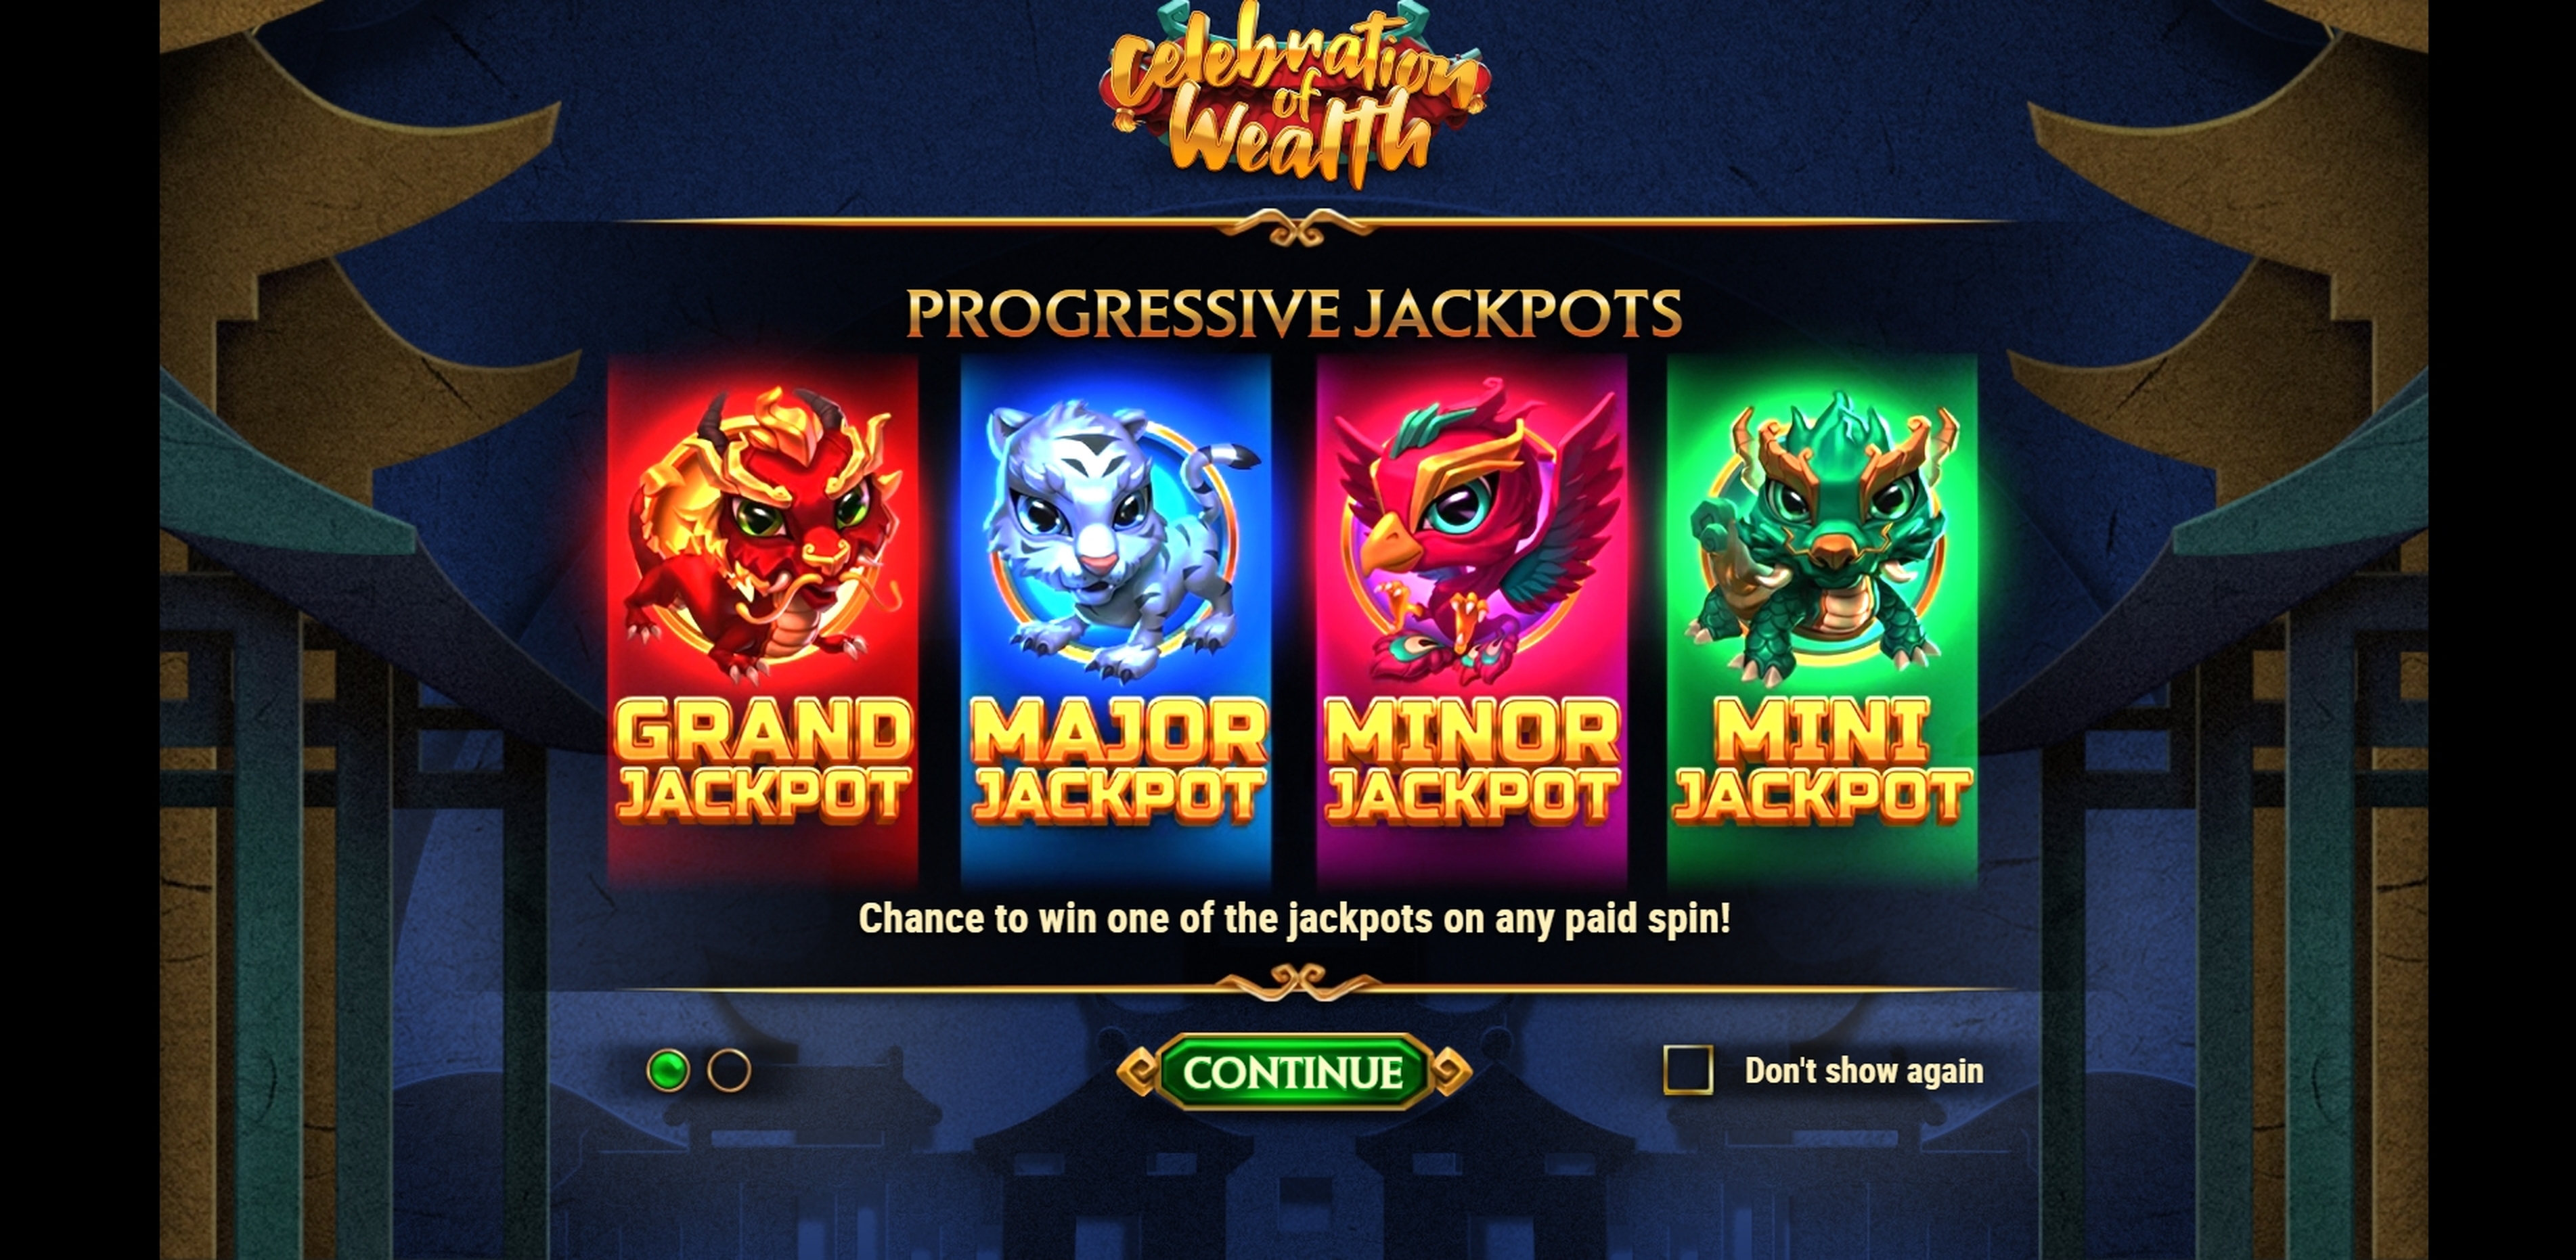 Play Celebration of Wealth Free Casino Slot Game by Playn GO